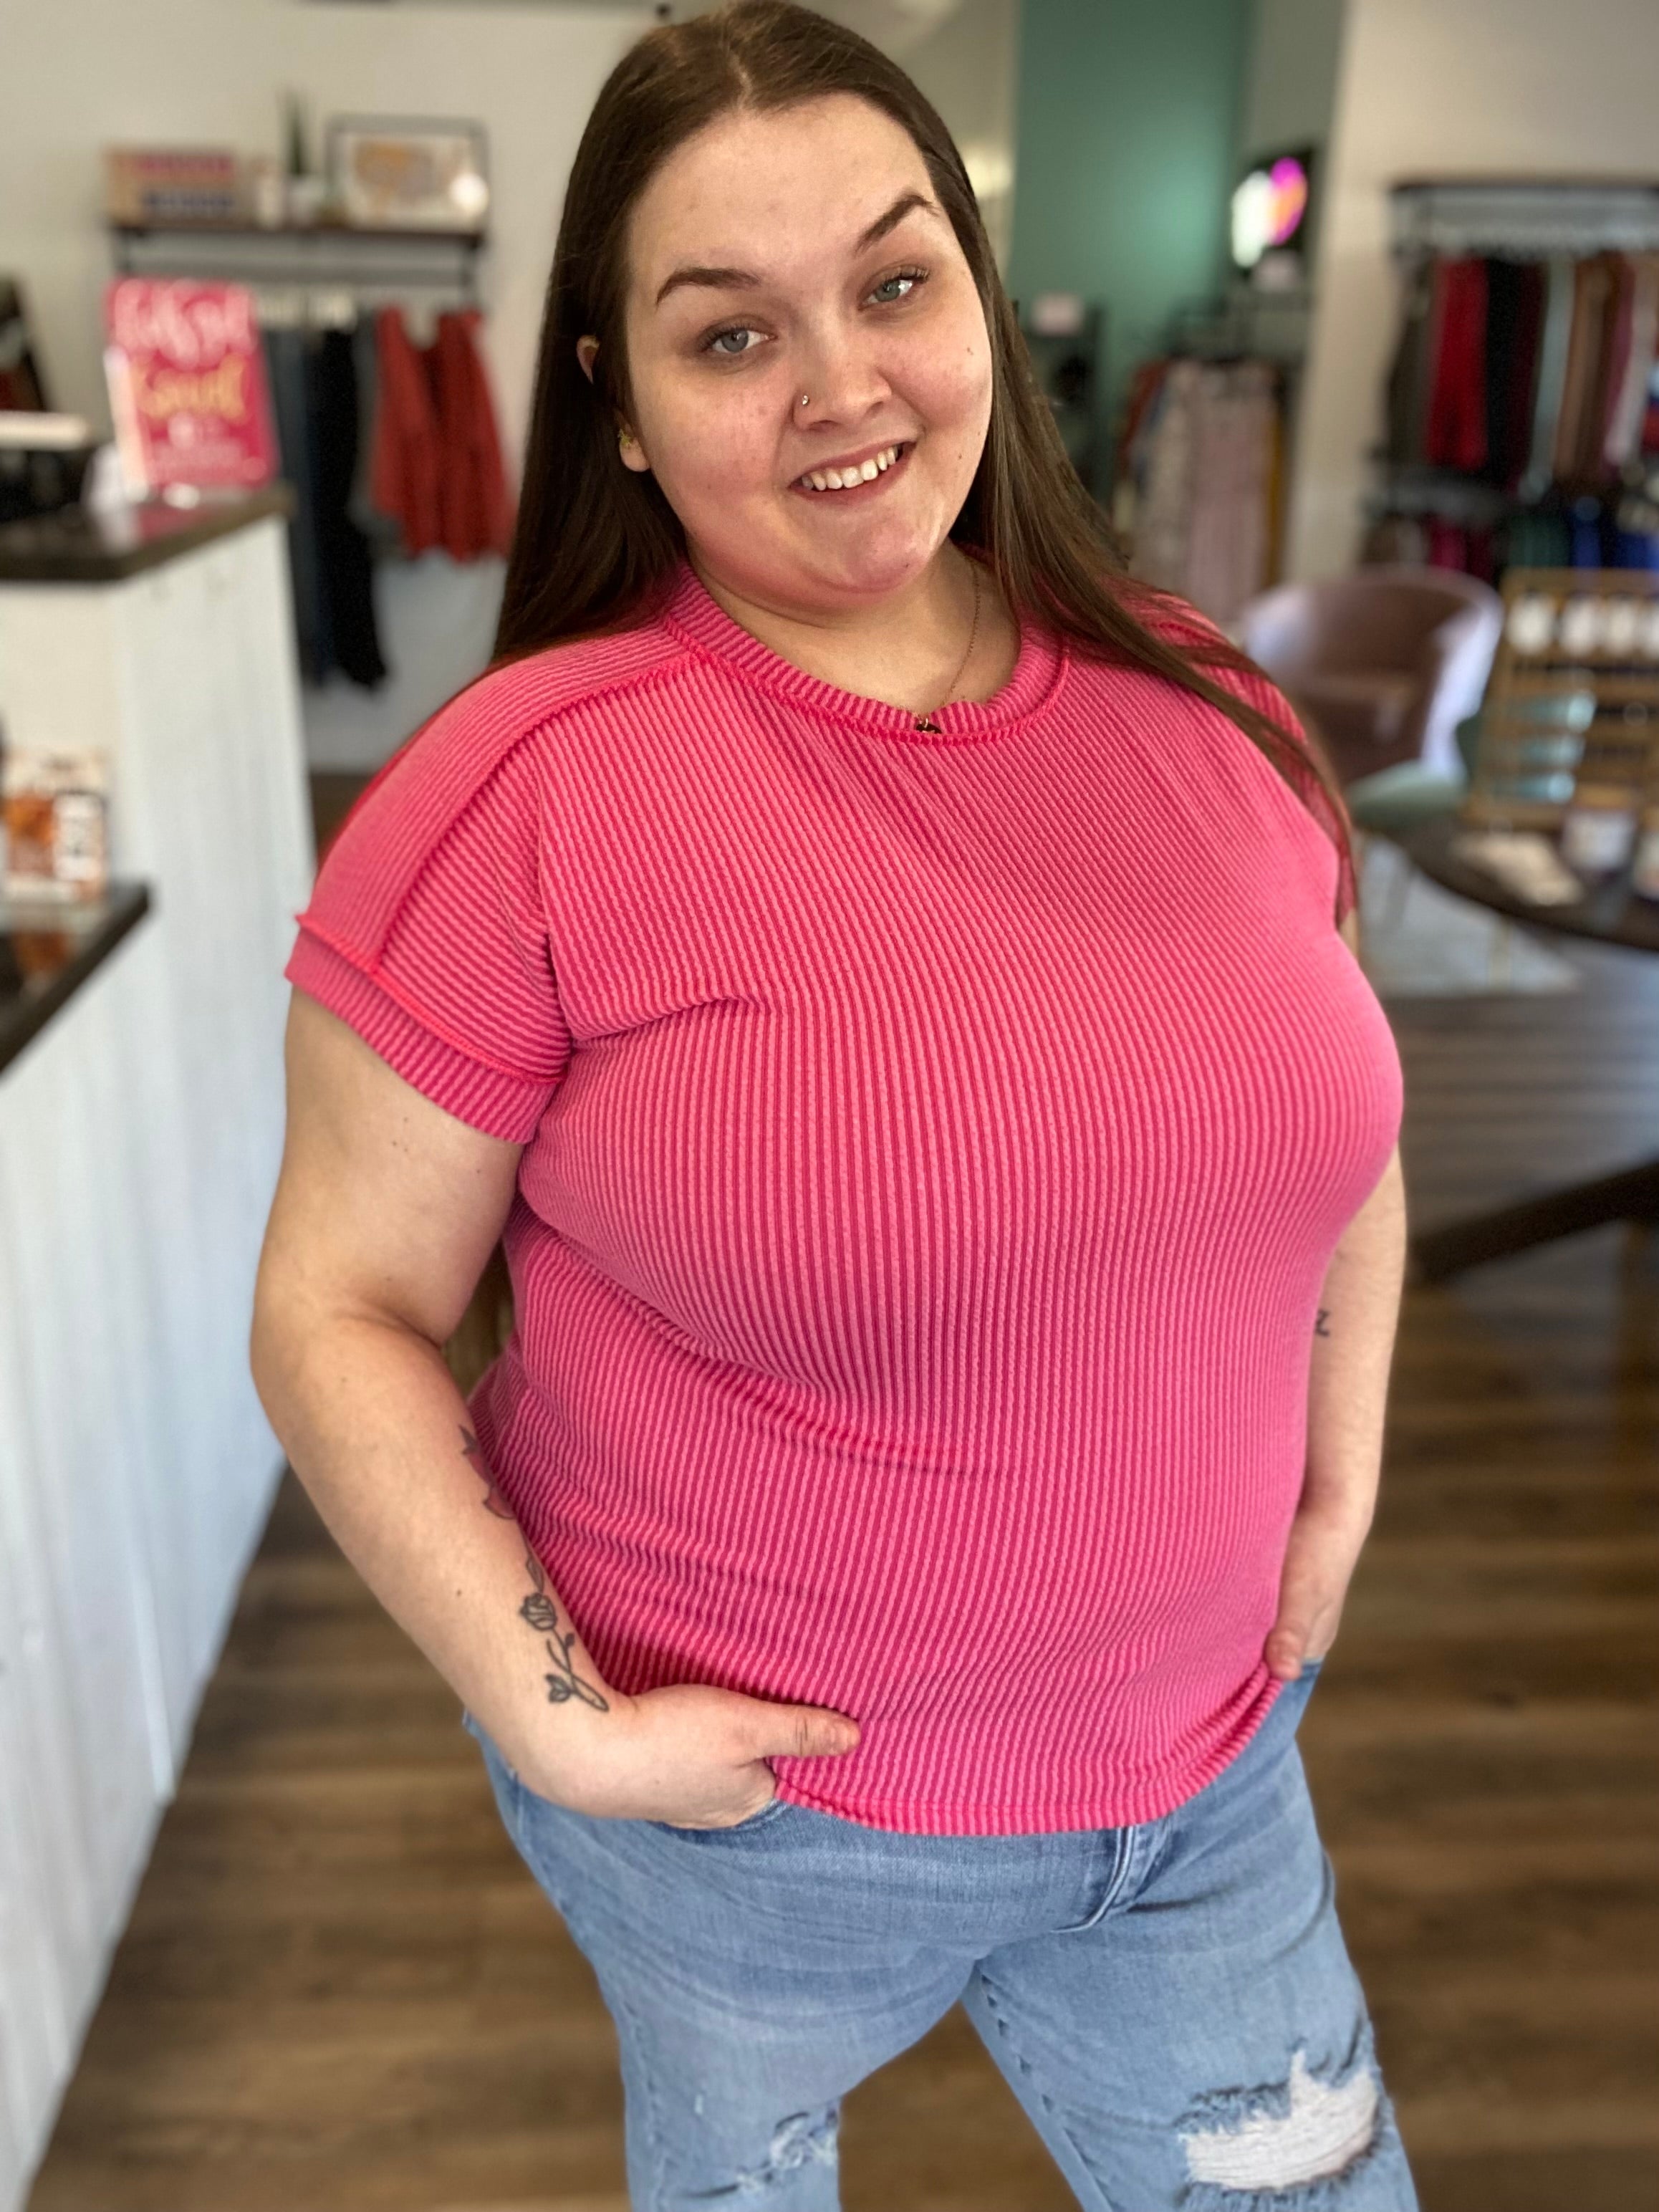 Shop Bright Pink Ribbed Tee-Shirts & Tops at Ruby Joy Boutique, a Women's Clothing Store in Pickerington, Ohio